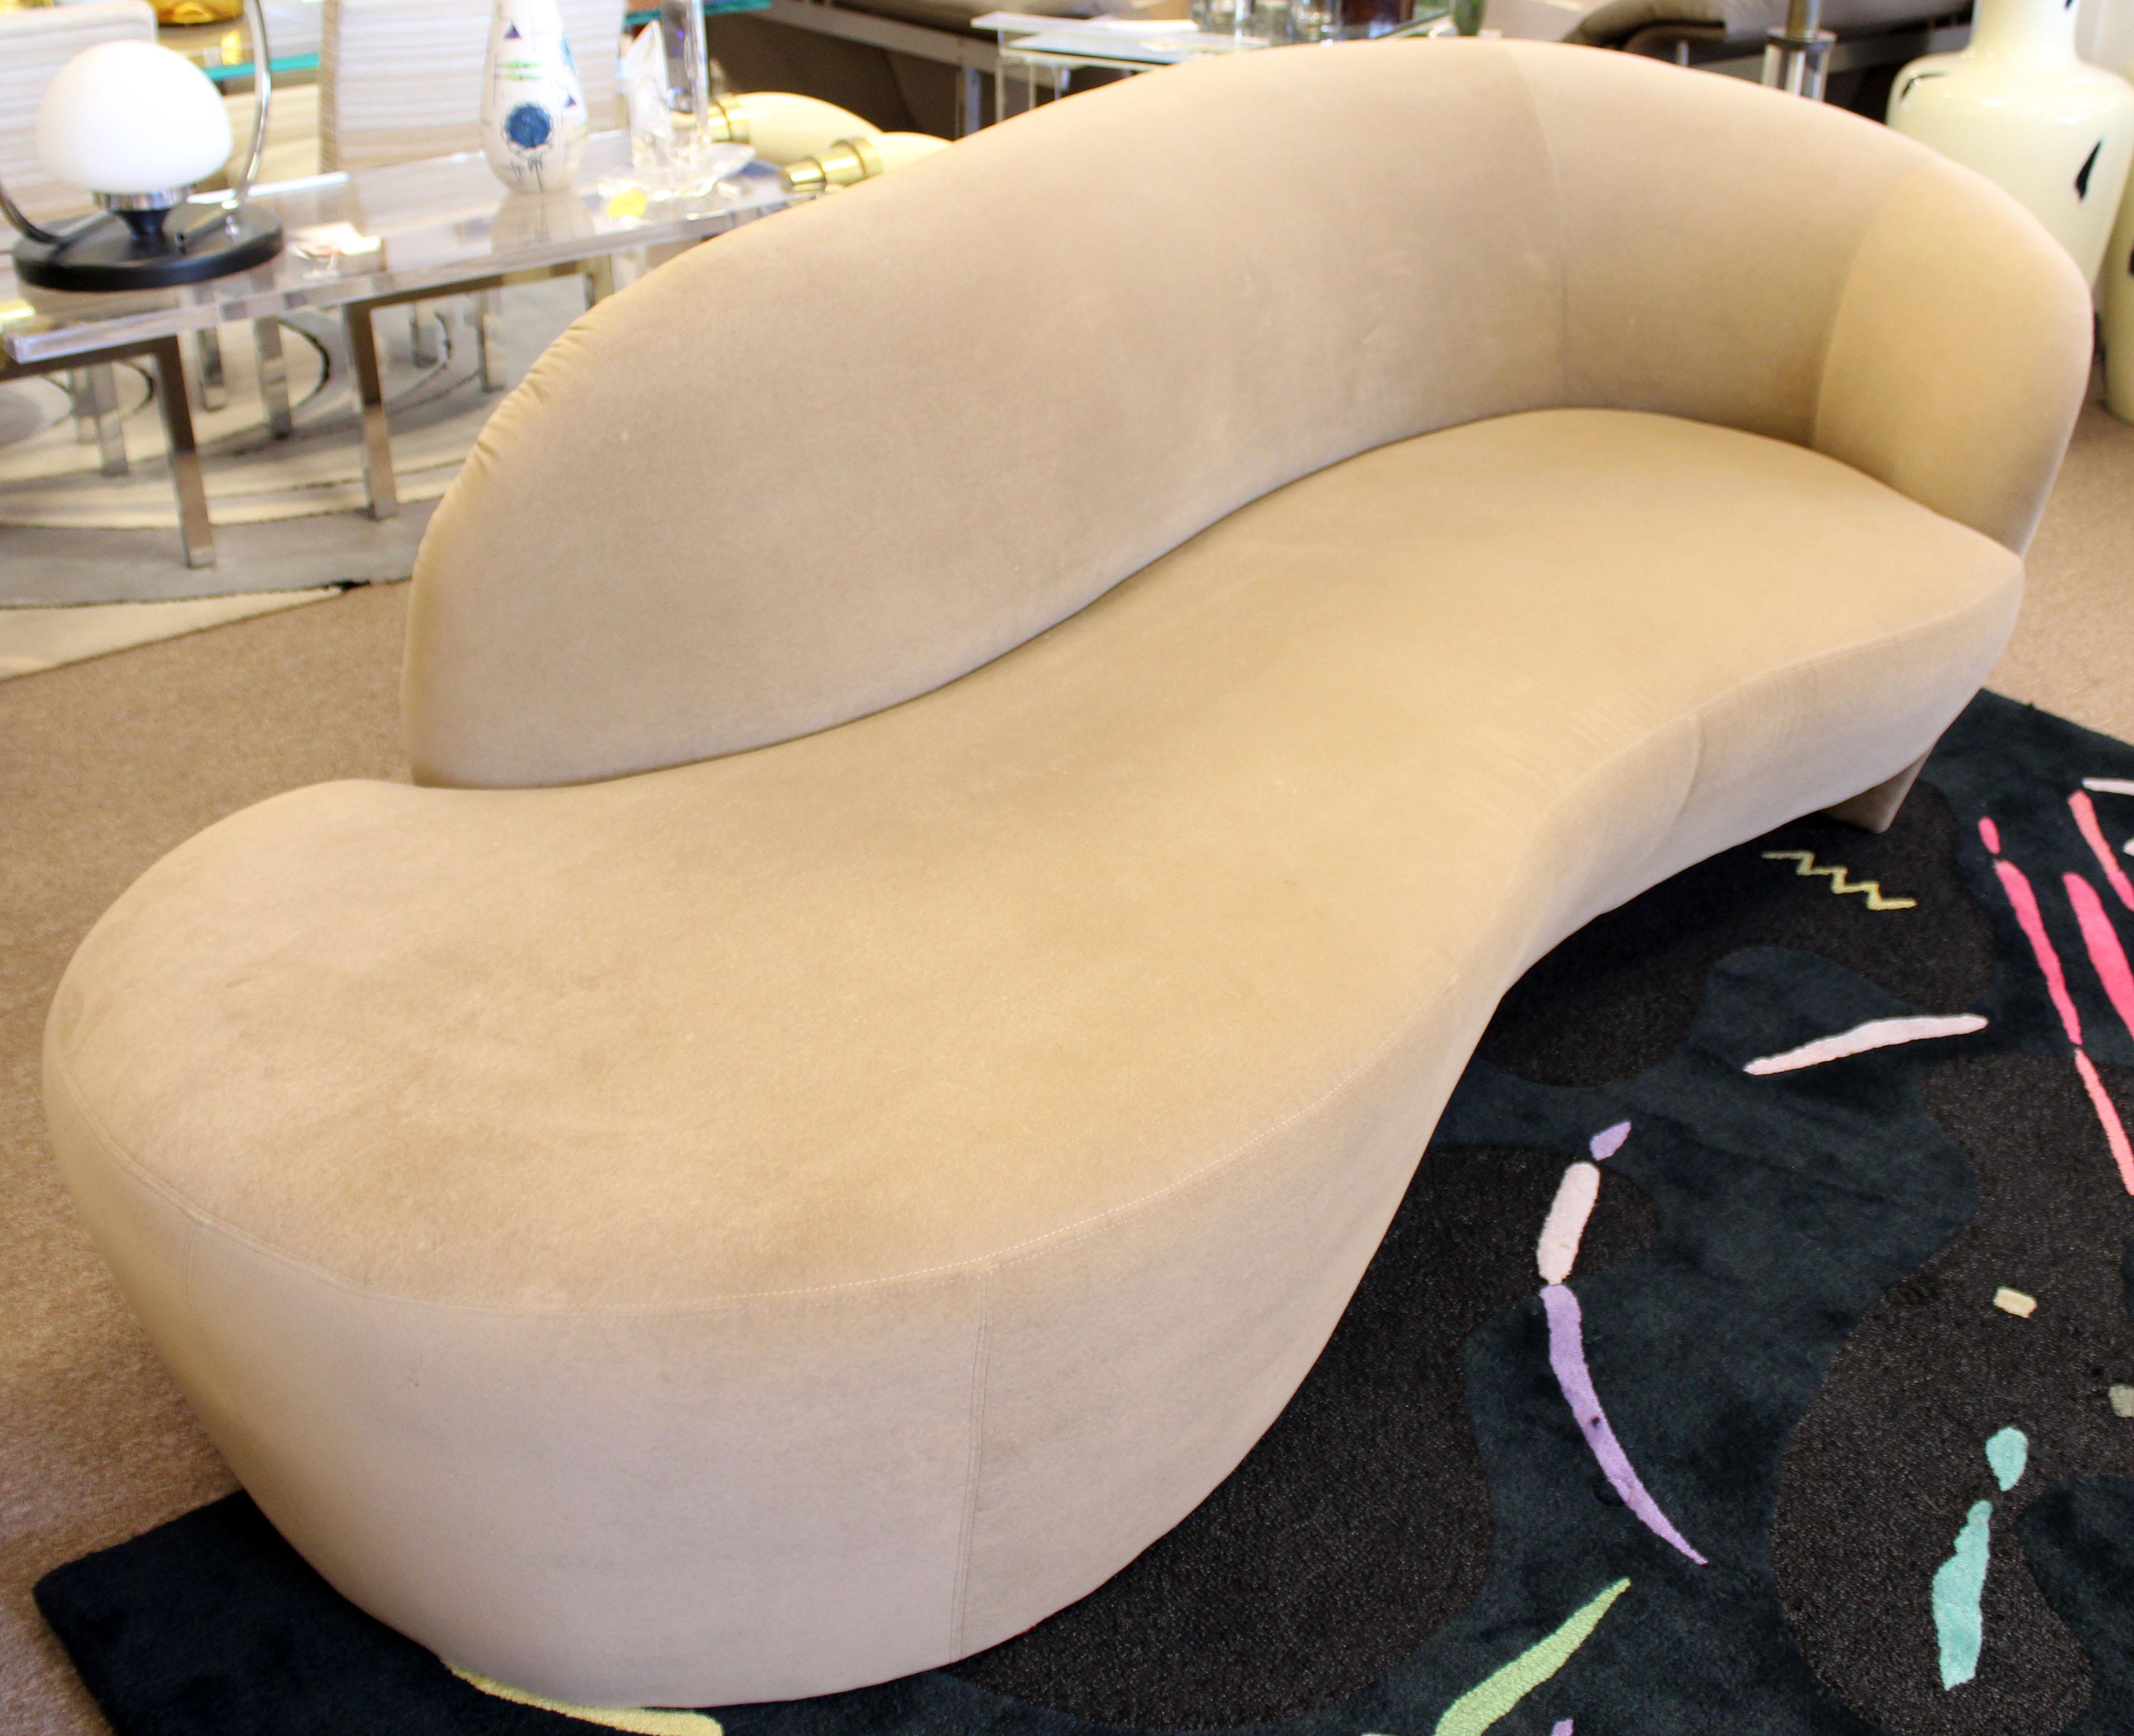 For your consideration is a fabulous, beige, sculptural Serpentine sofa or chaise, by Vladimir Kagan for Weiman Preview, circa 1980s. In excellent condition. The dimensions are 93